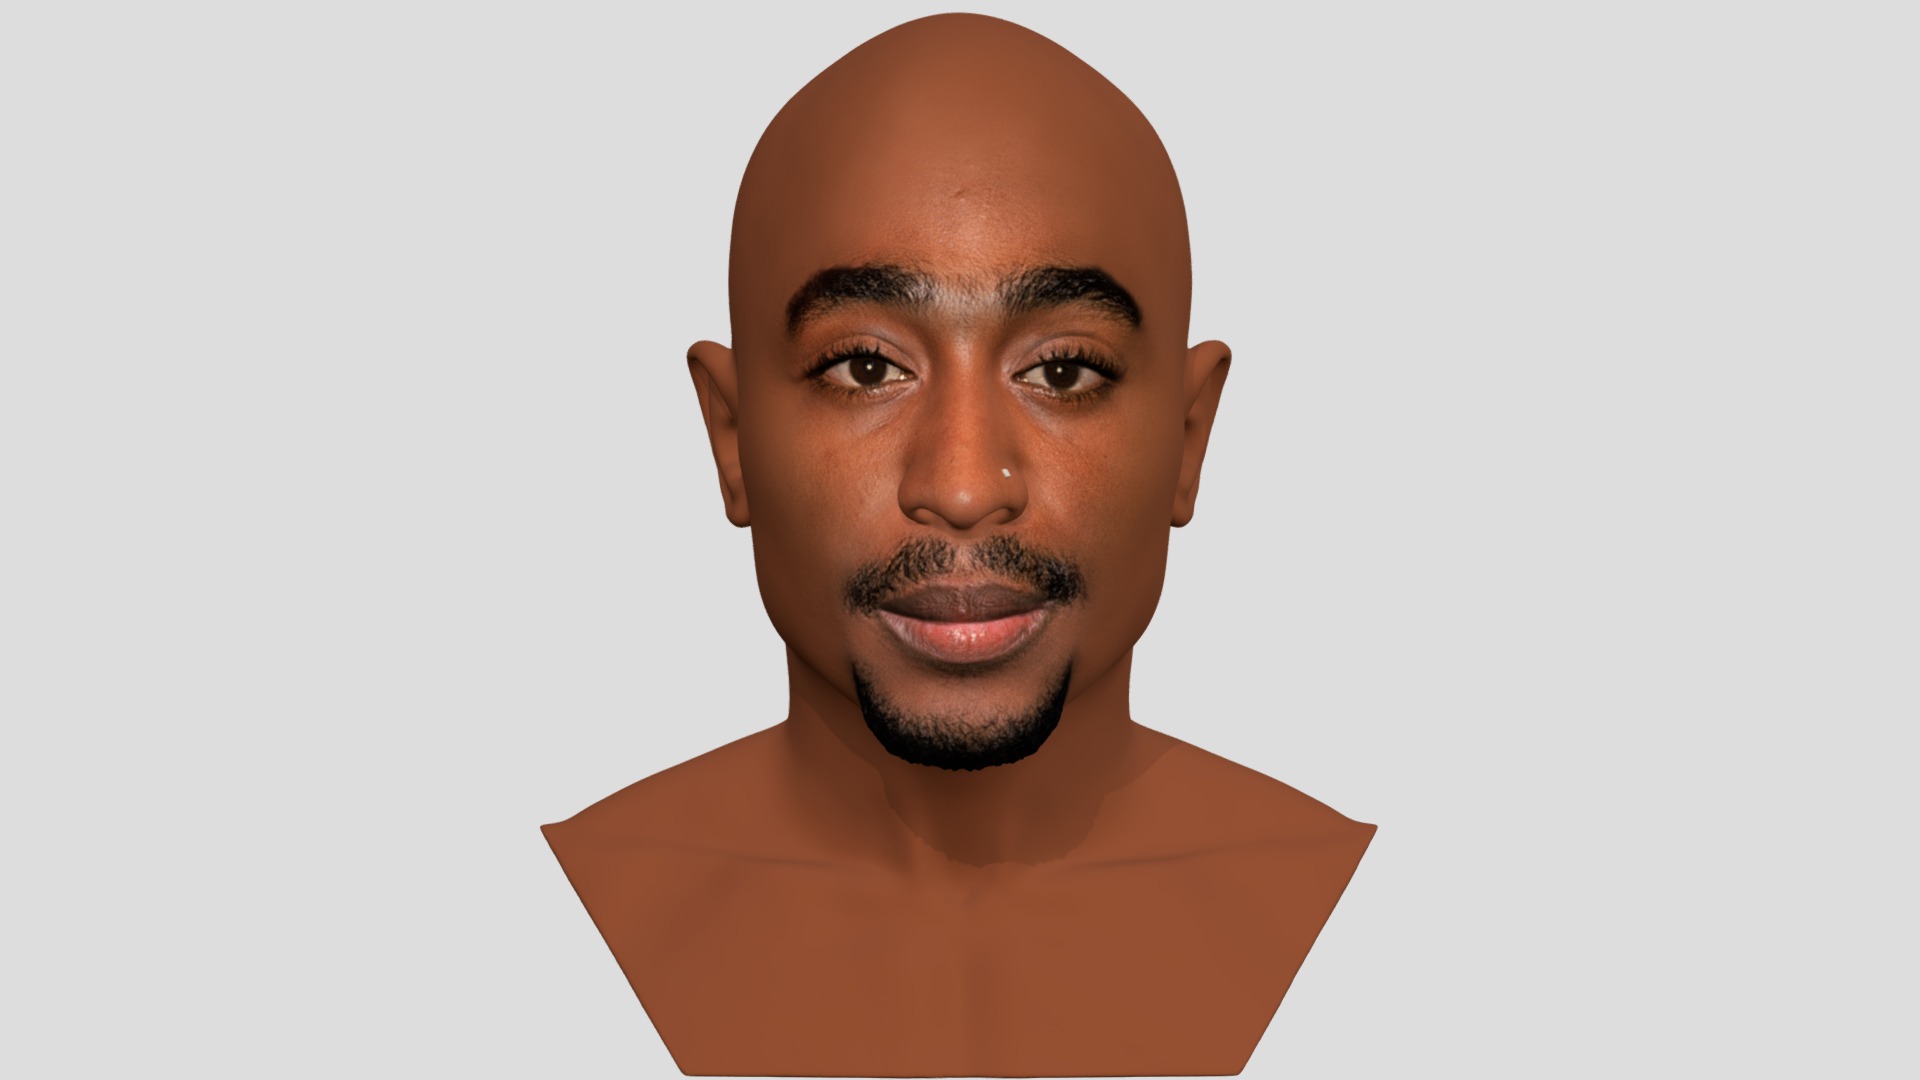 3D model Tupac Shakur bust for full color 3D printing - This is a 3D model of the Tupac Shakur bust for full color 3D printing. The 3D model is about a person with a mustache.